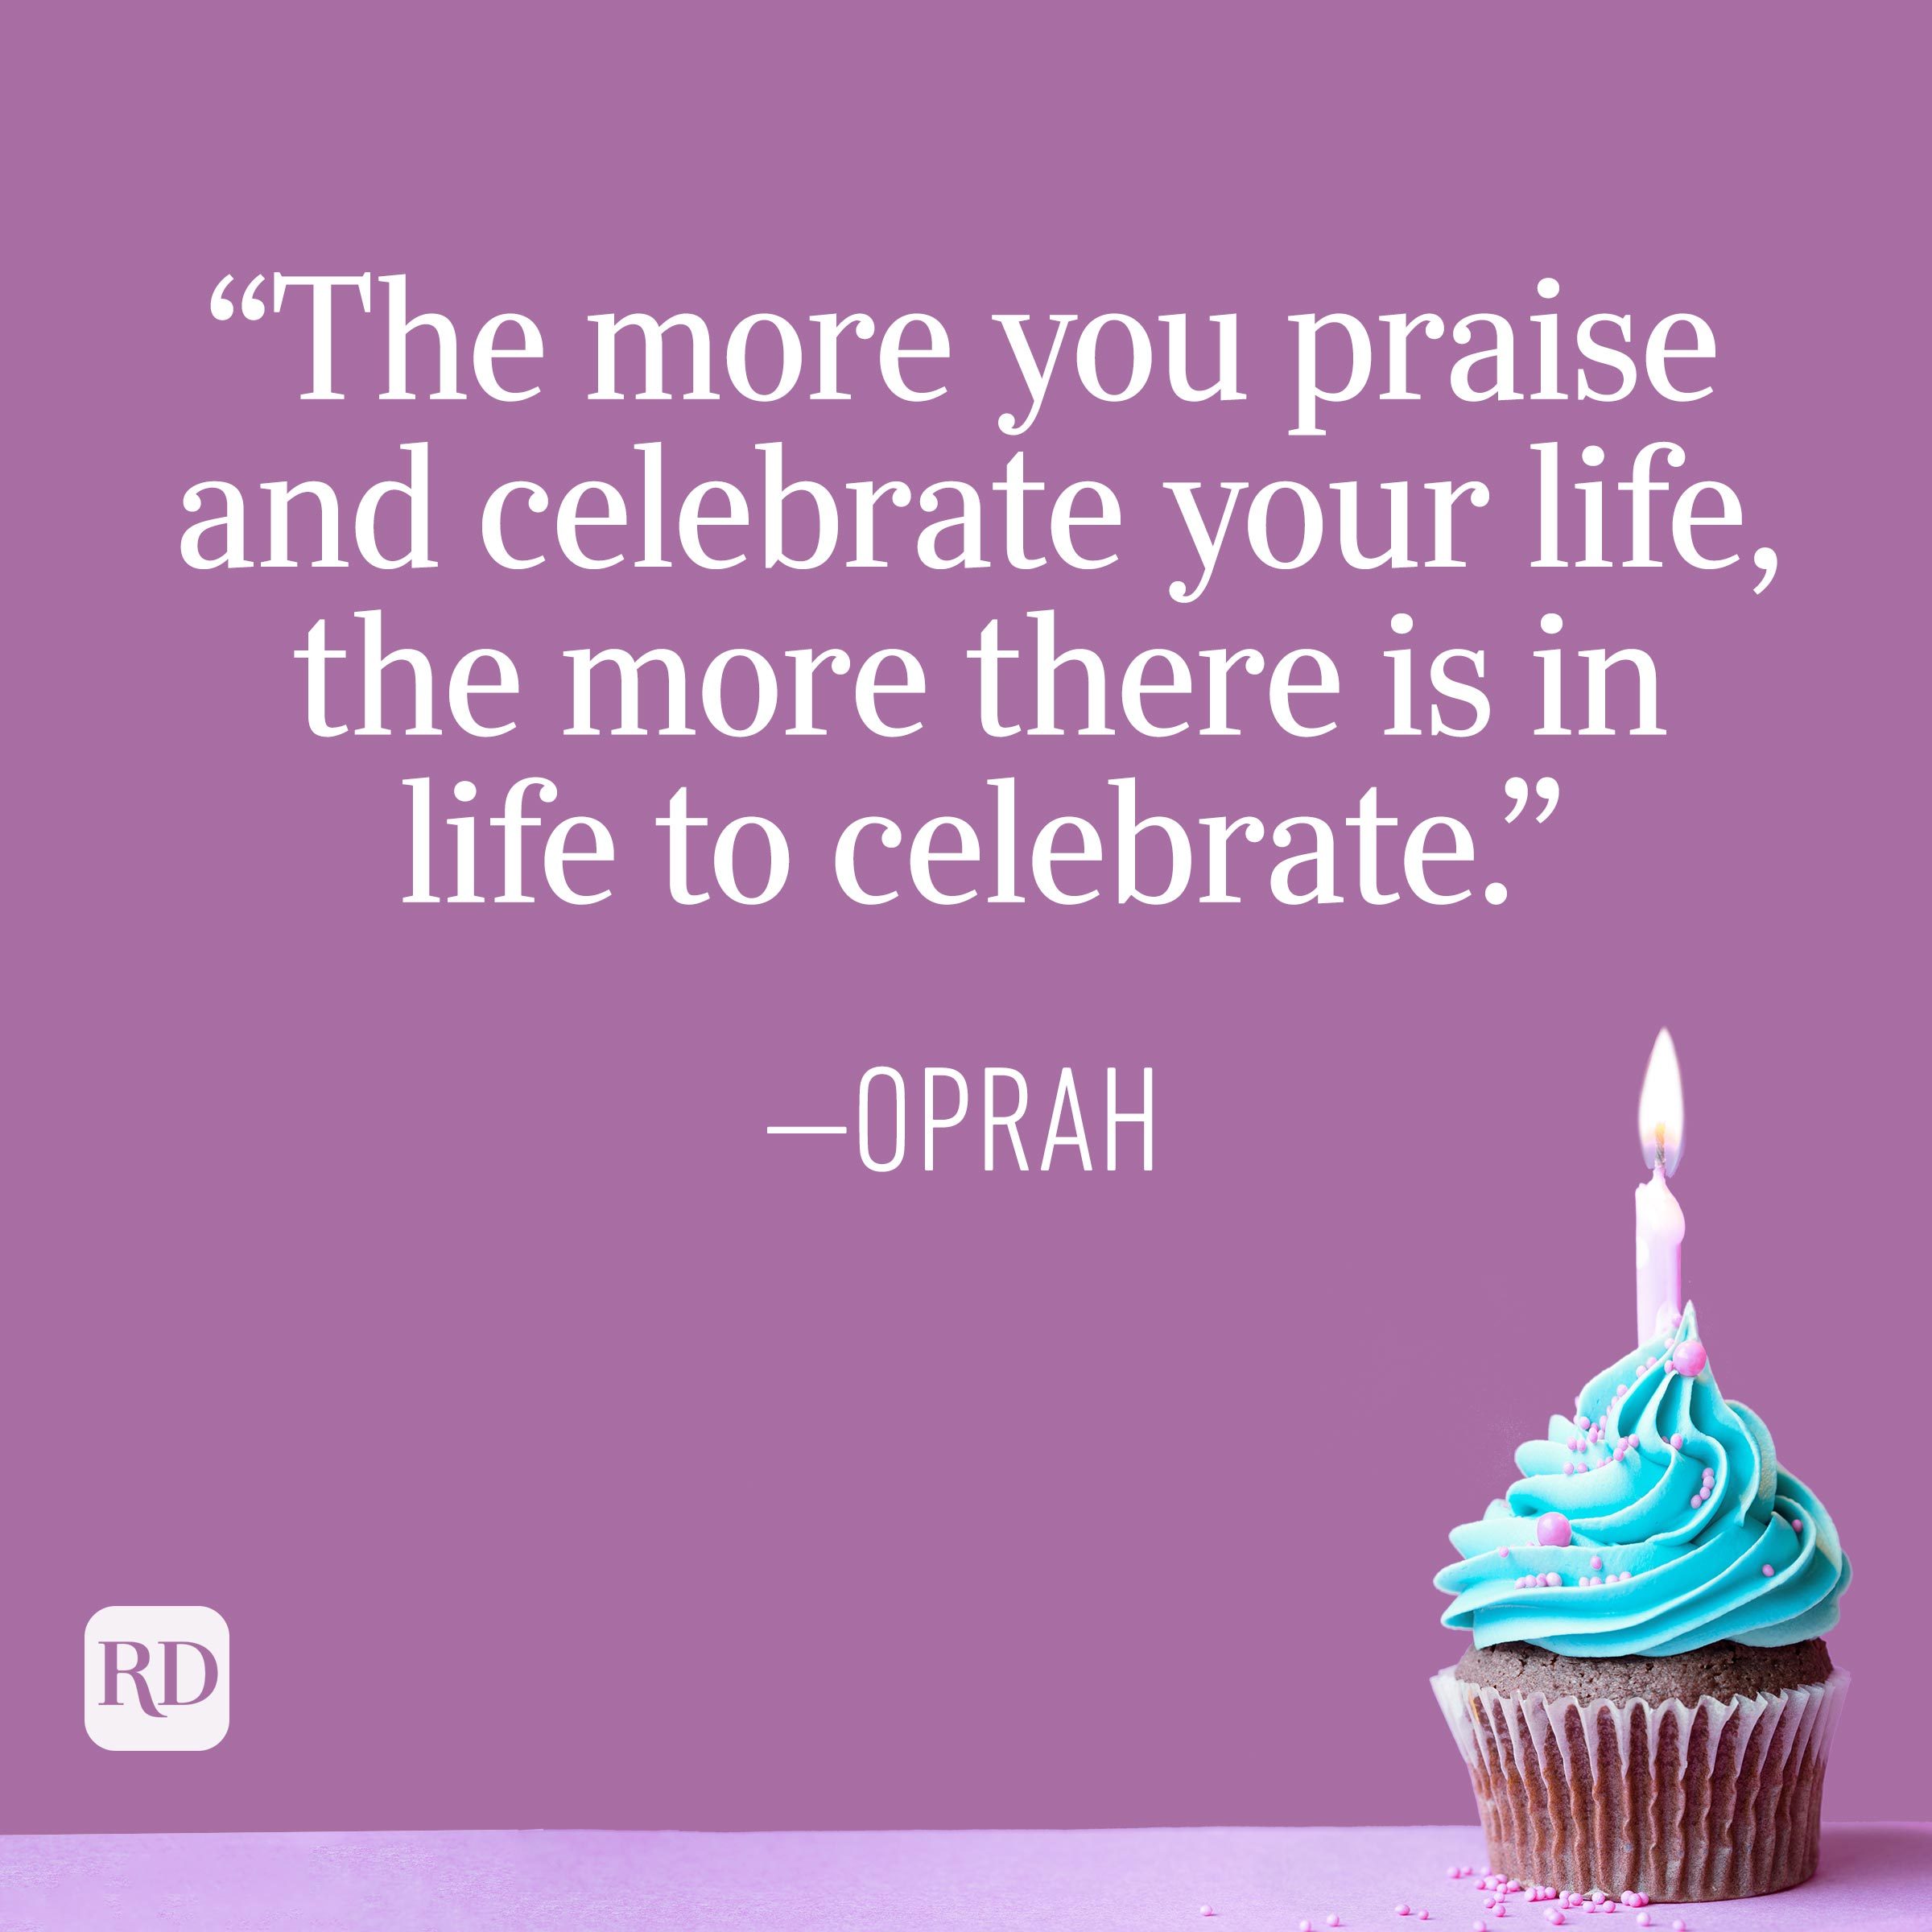 "The more you praise and celebrate your life, the more there is in life to celebrate." —Oprah